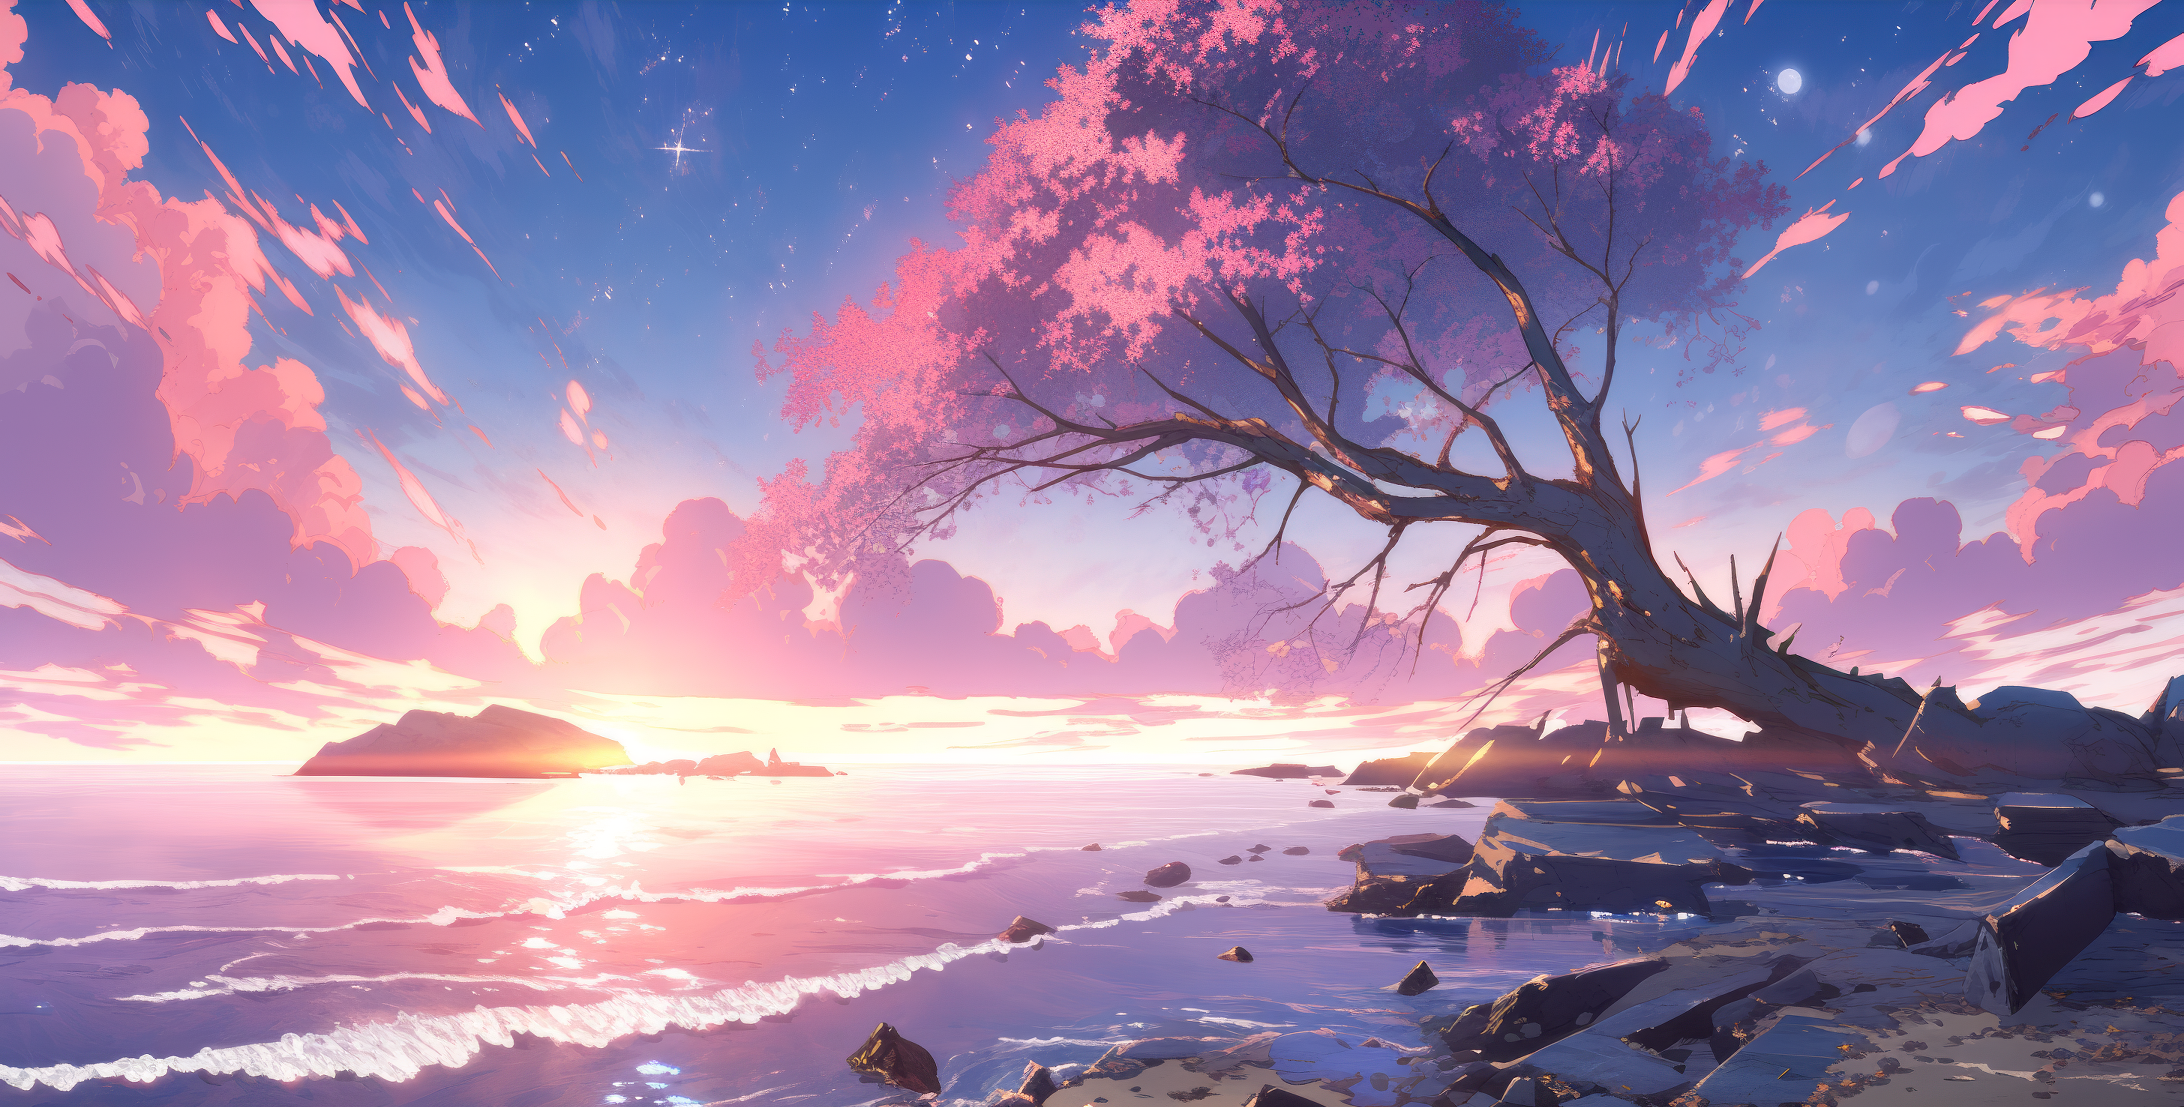 Pink Aesthetic Anime Landscape Wallpaper By Patrika